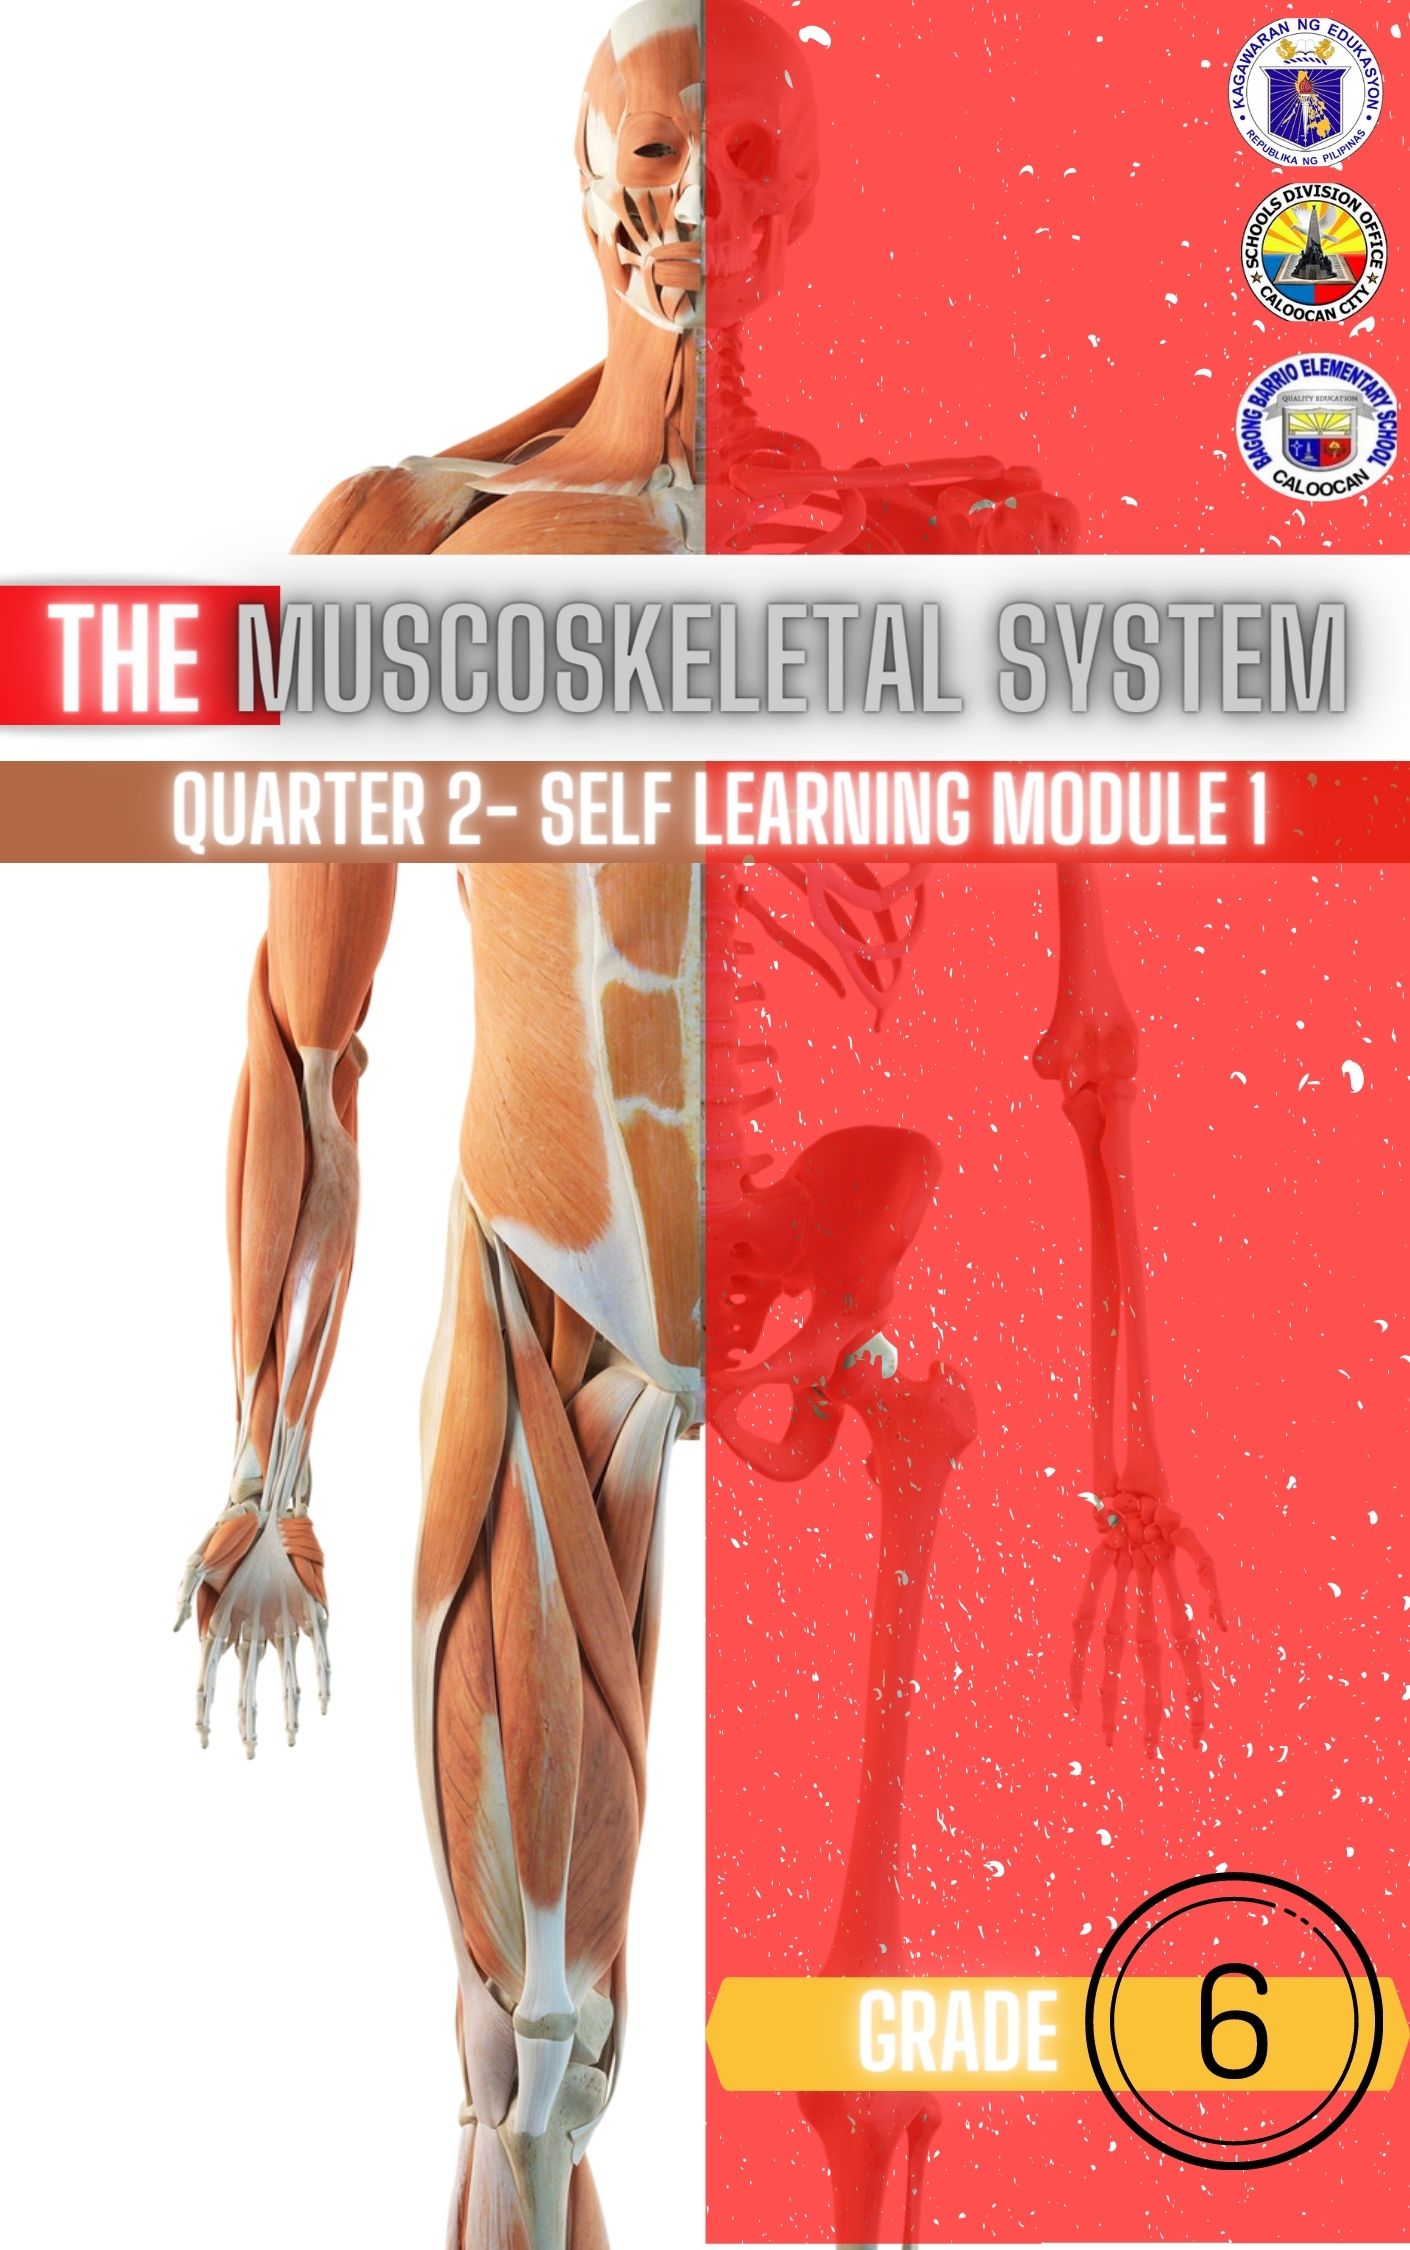 136627-Bagong Barrio Elementary School-Science 6-Quarter 2-Module 1- Musculoskeletal System